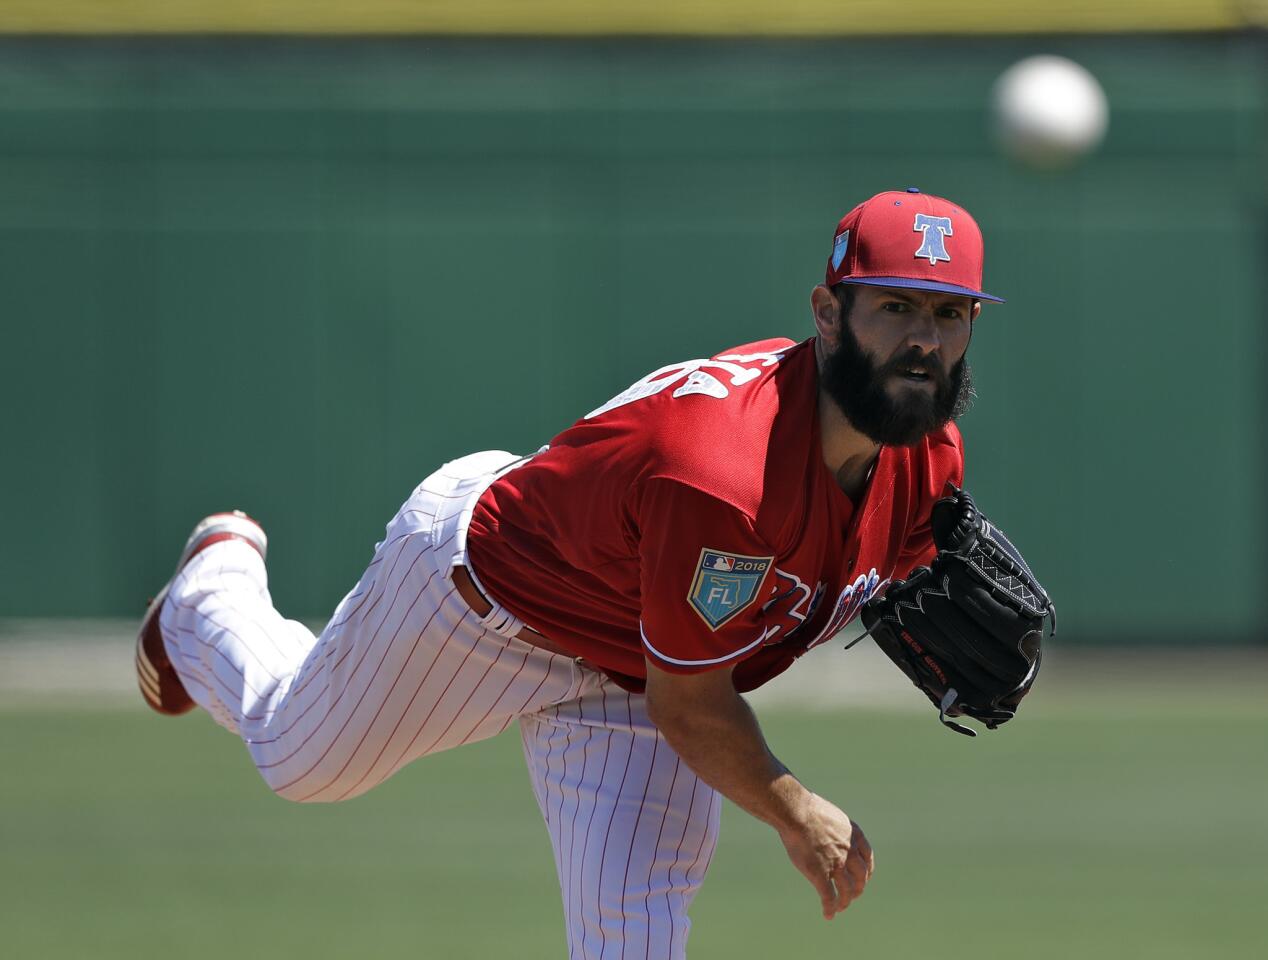 Phillies starting pitcher Jake Arrieta warms up before a spring training game against the Tigers on March 22, 2018, in Clearwater, Fla.